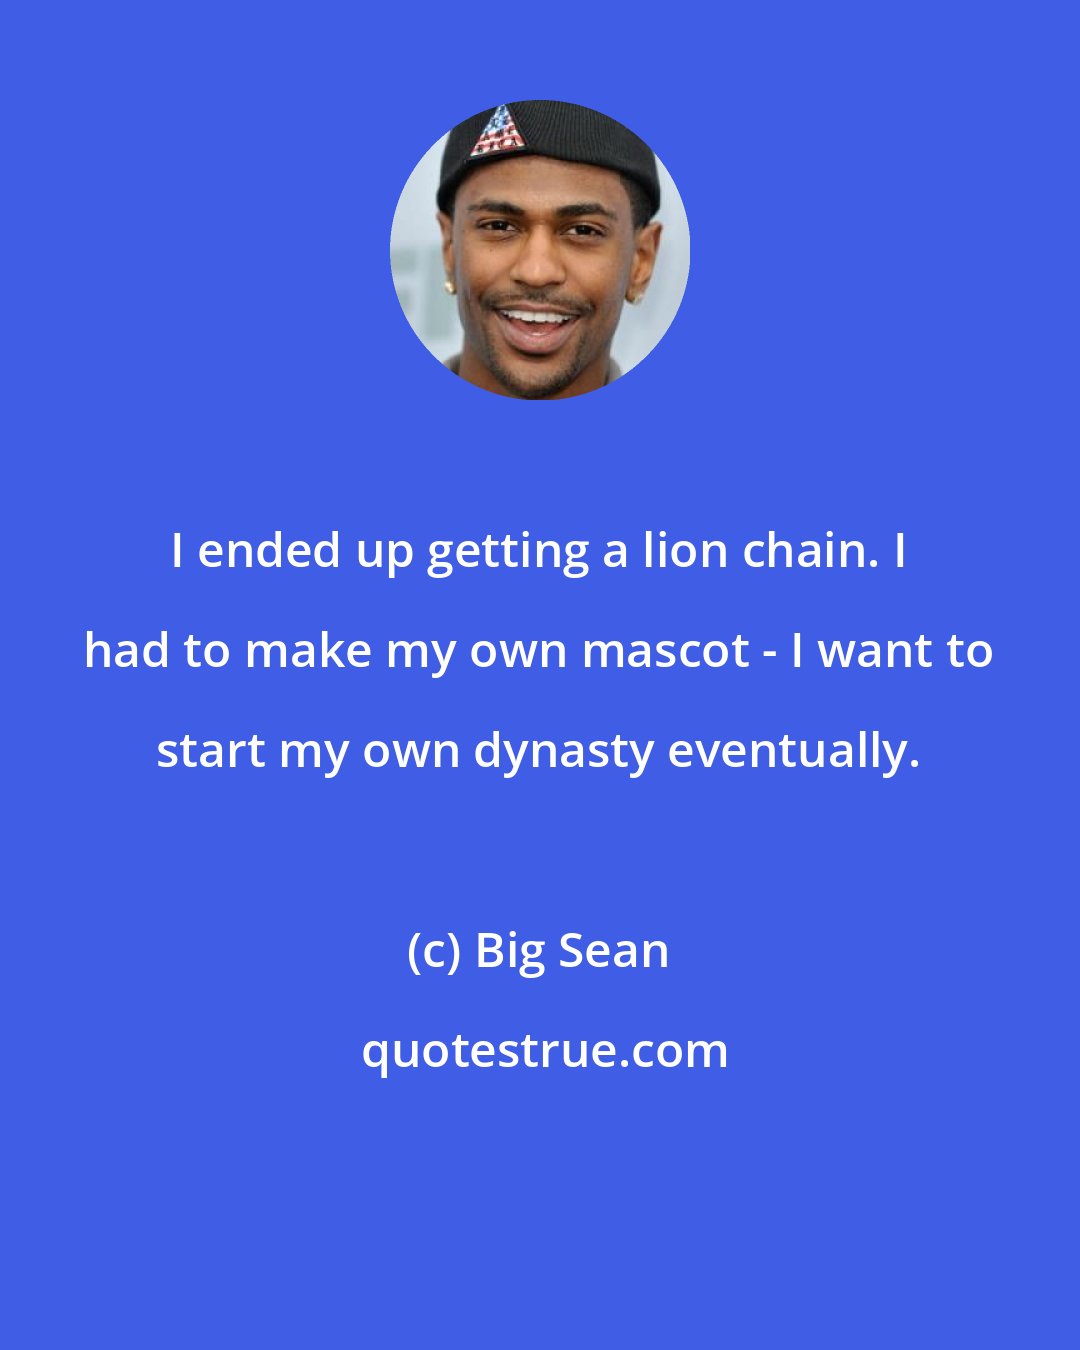 Big Sean: I ended up getting a lion chain. I had to make my own mascot - I want to start my own dynasty eventually.